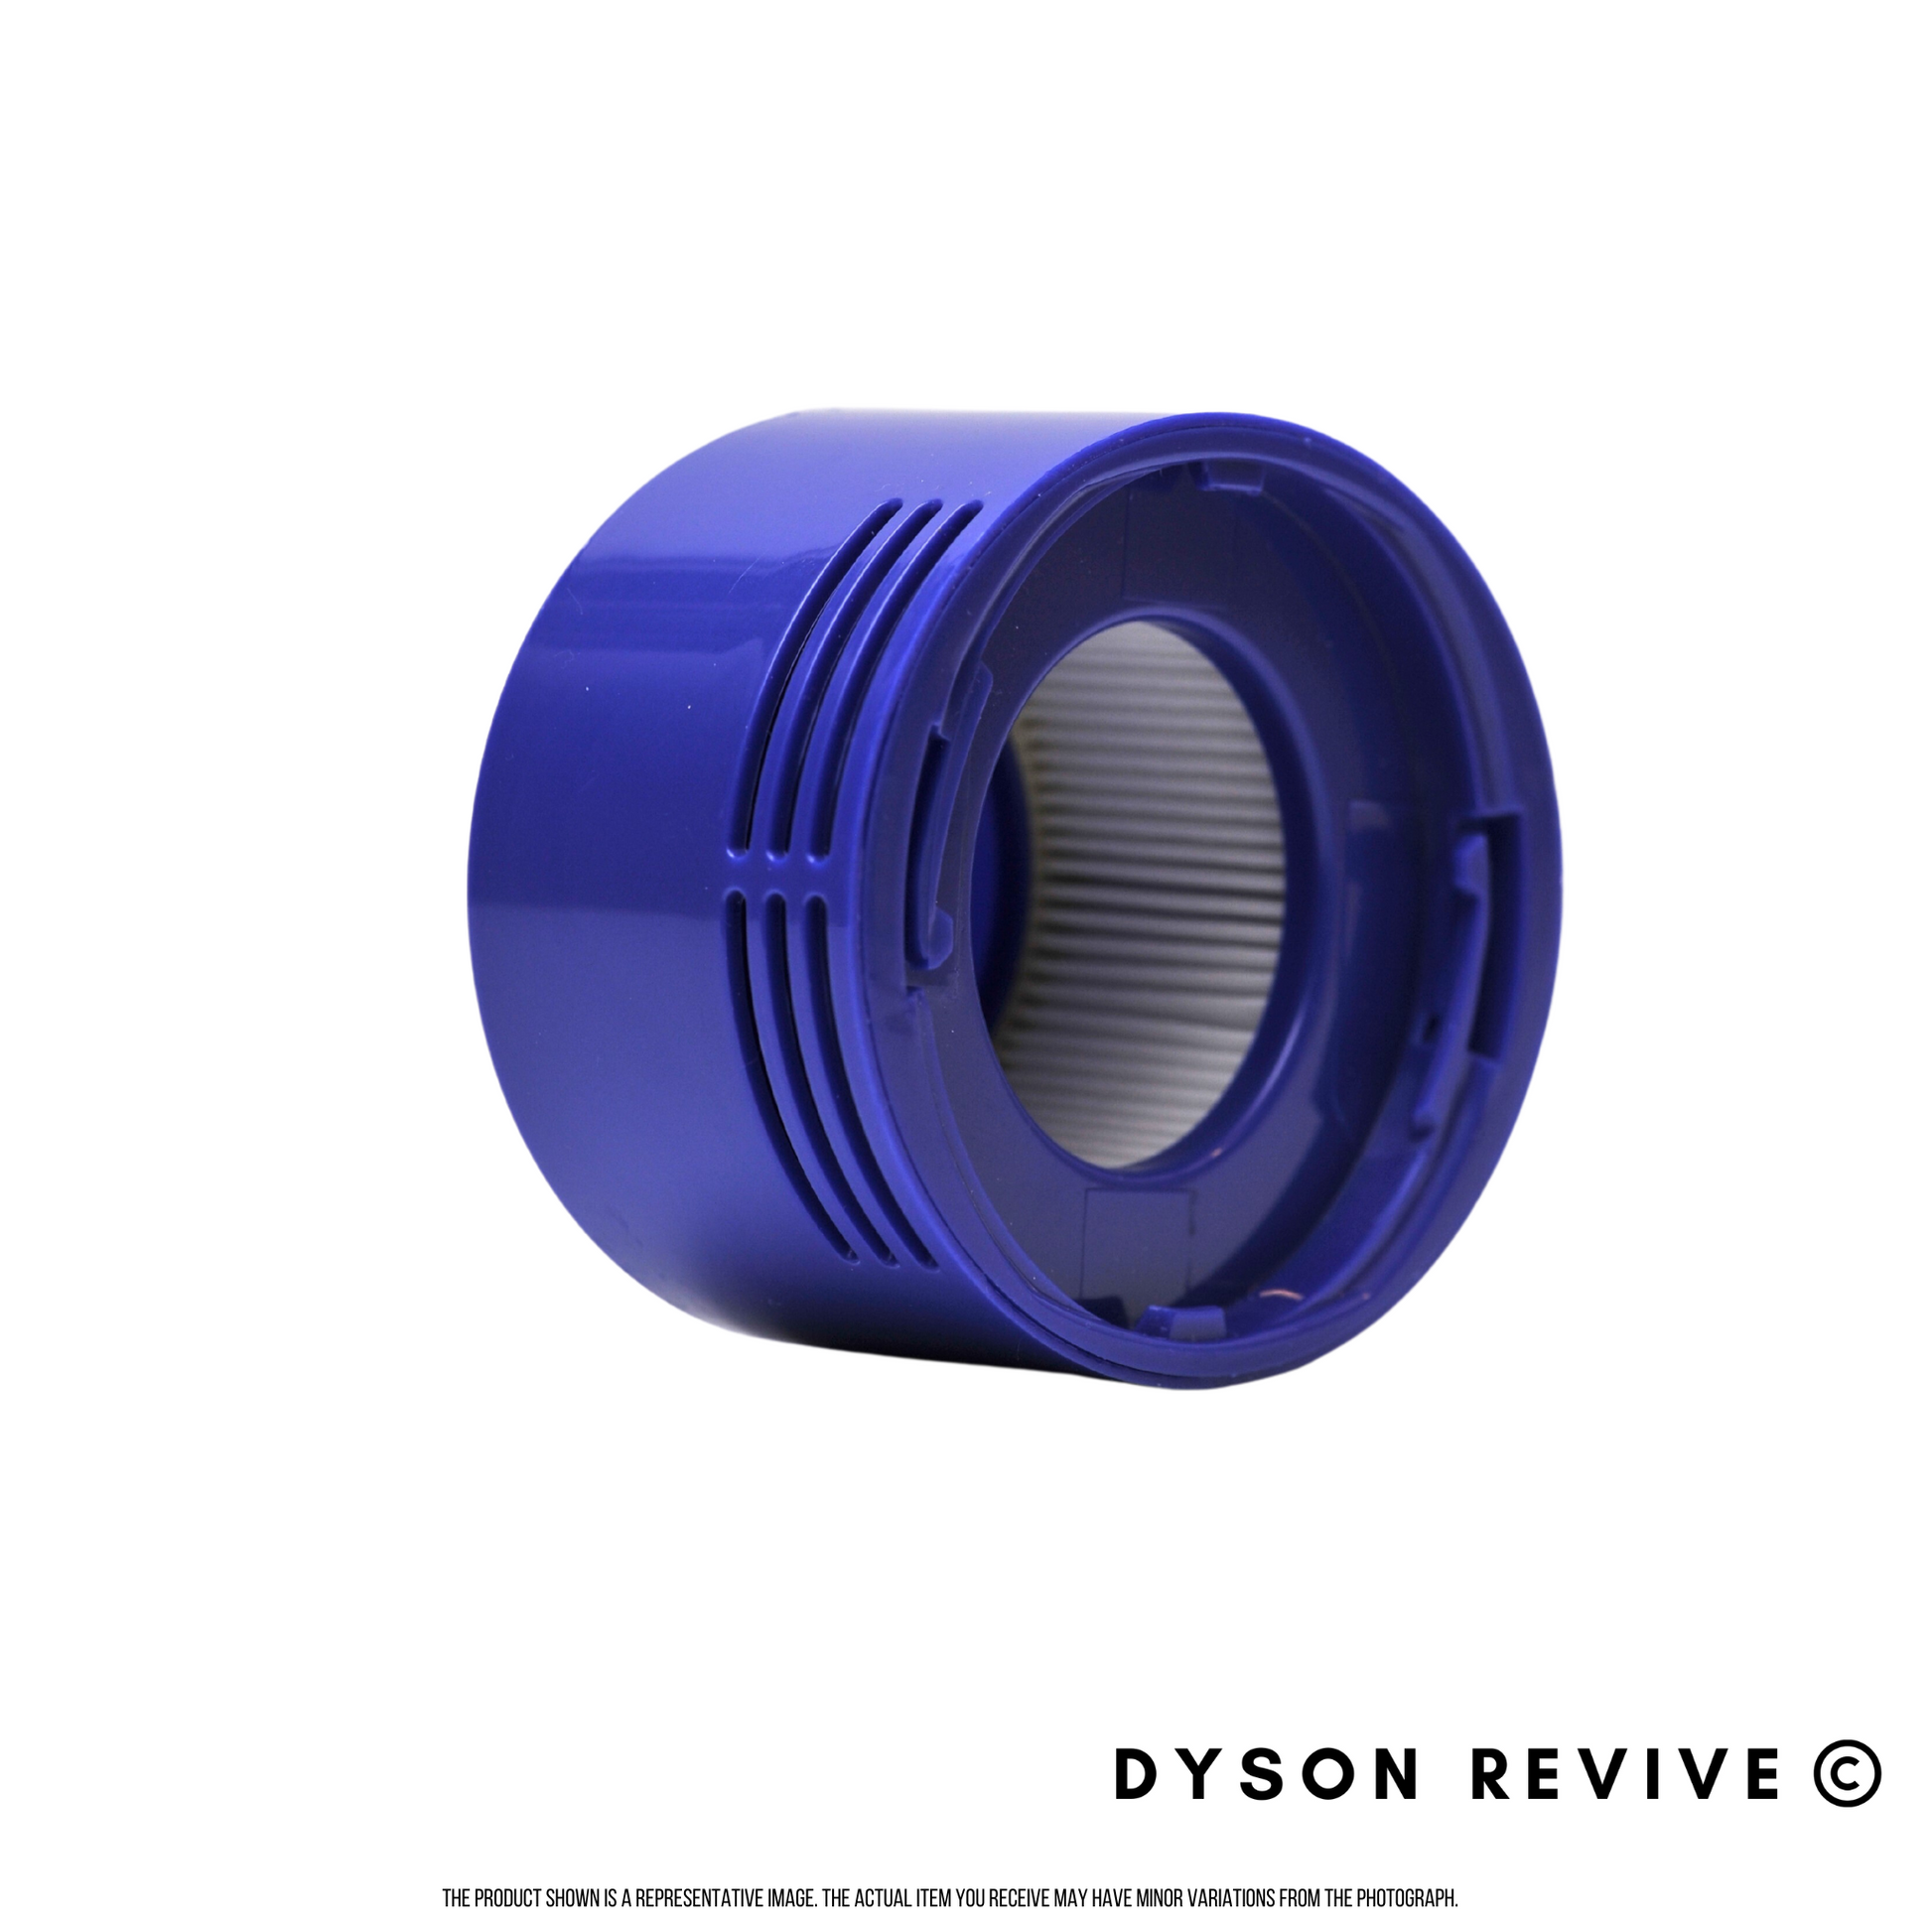 Pre Filter + HEPA Post-Filter kit for Dyson V7 V8 Vacuum Replacement  Pre-Filter and Post- Filter Accessories